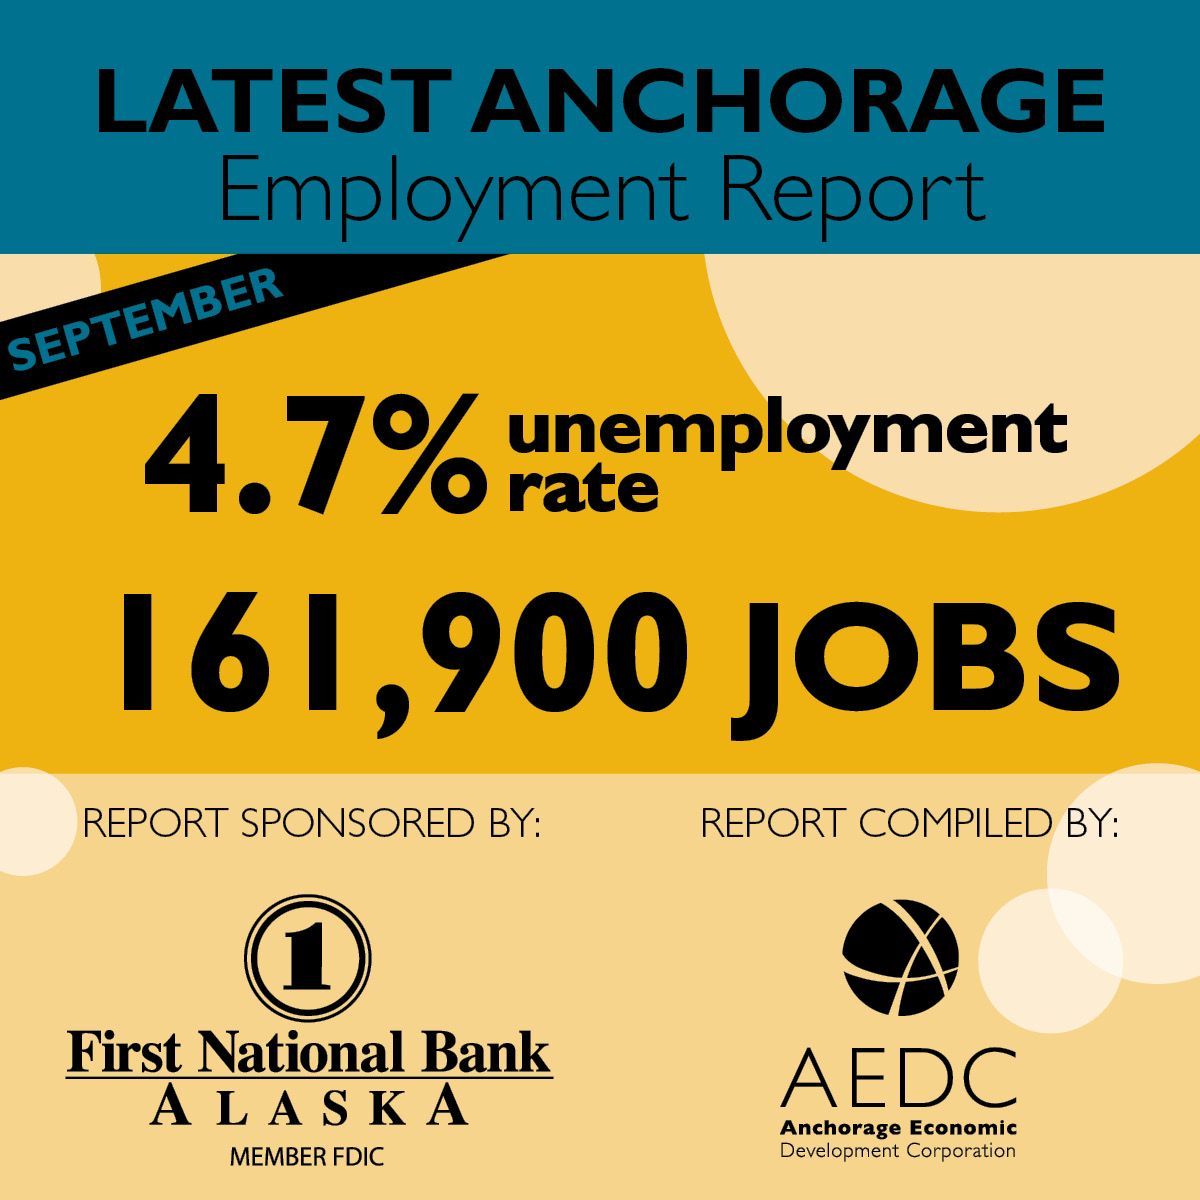 Anchorage Employment Report: Seventh Edition 2015